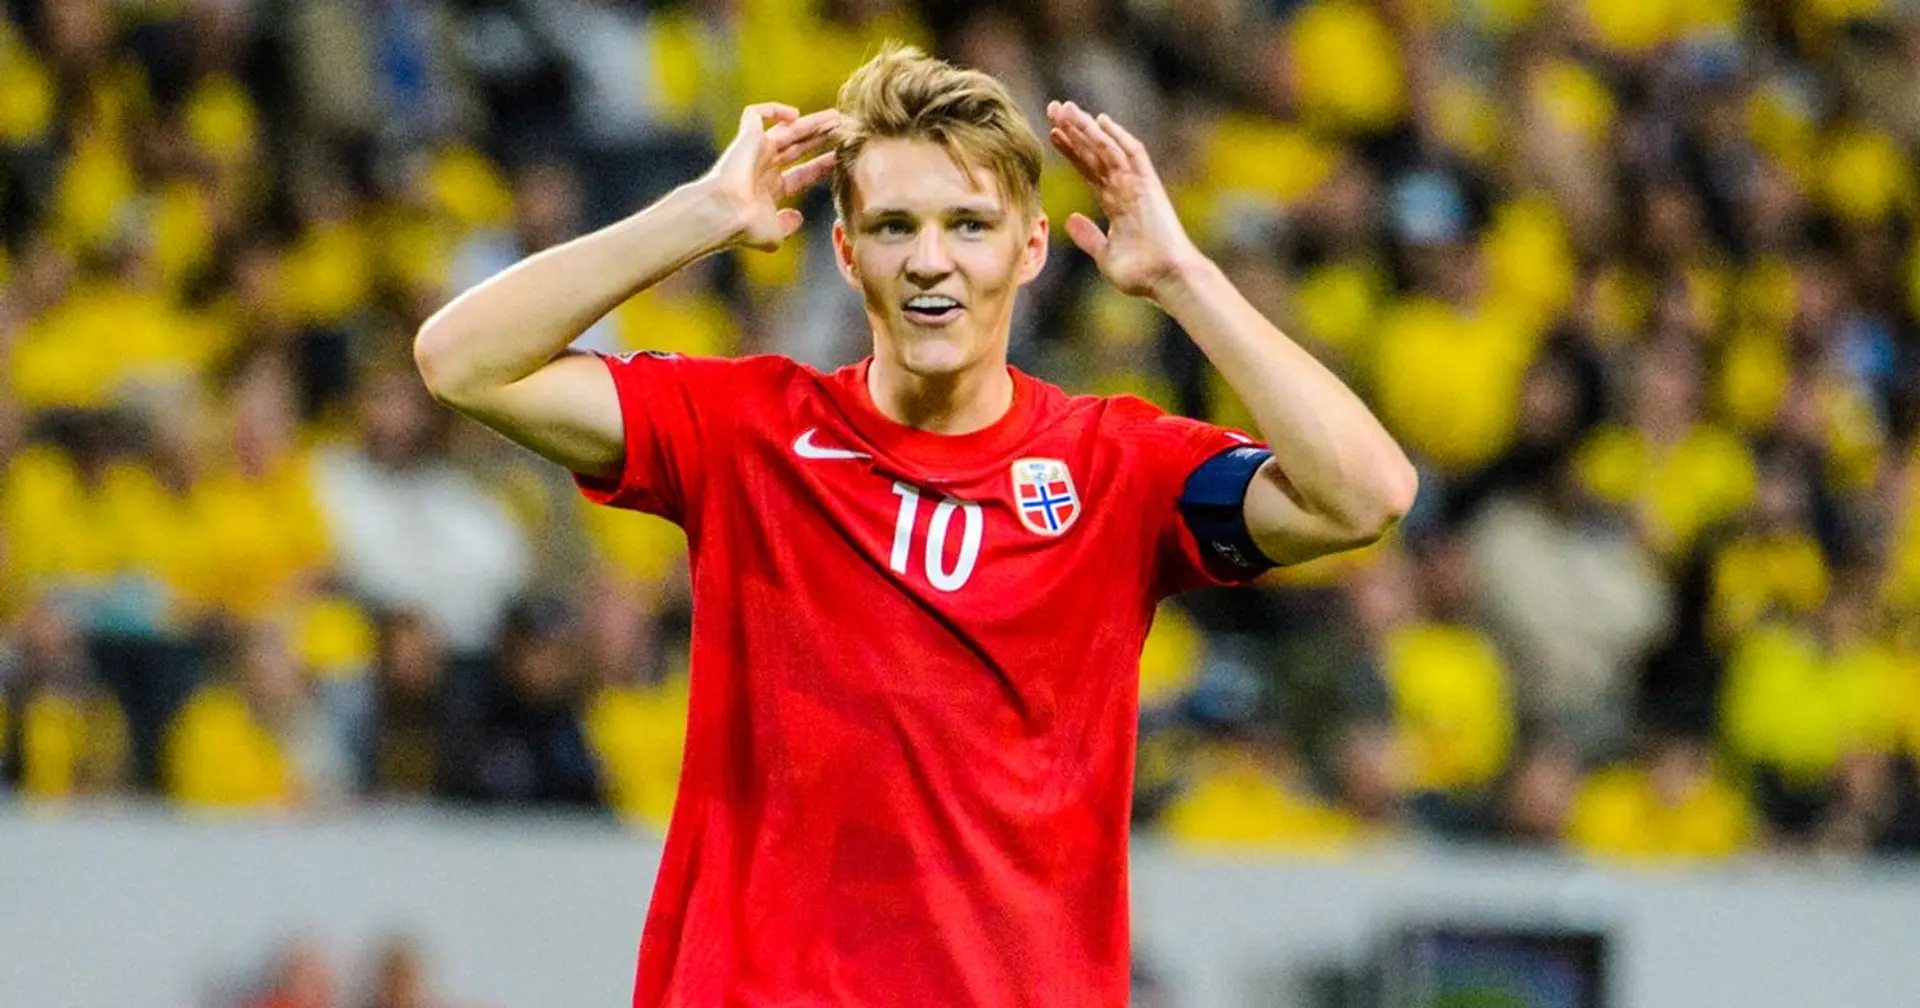 Arsenal receive injury boost as Martin Odegaard plays 70 minutes for Norway